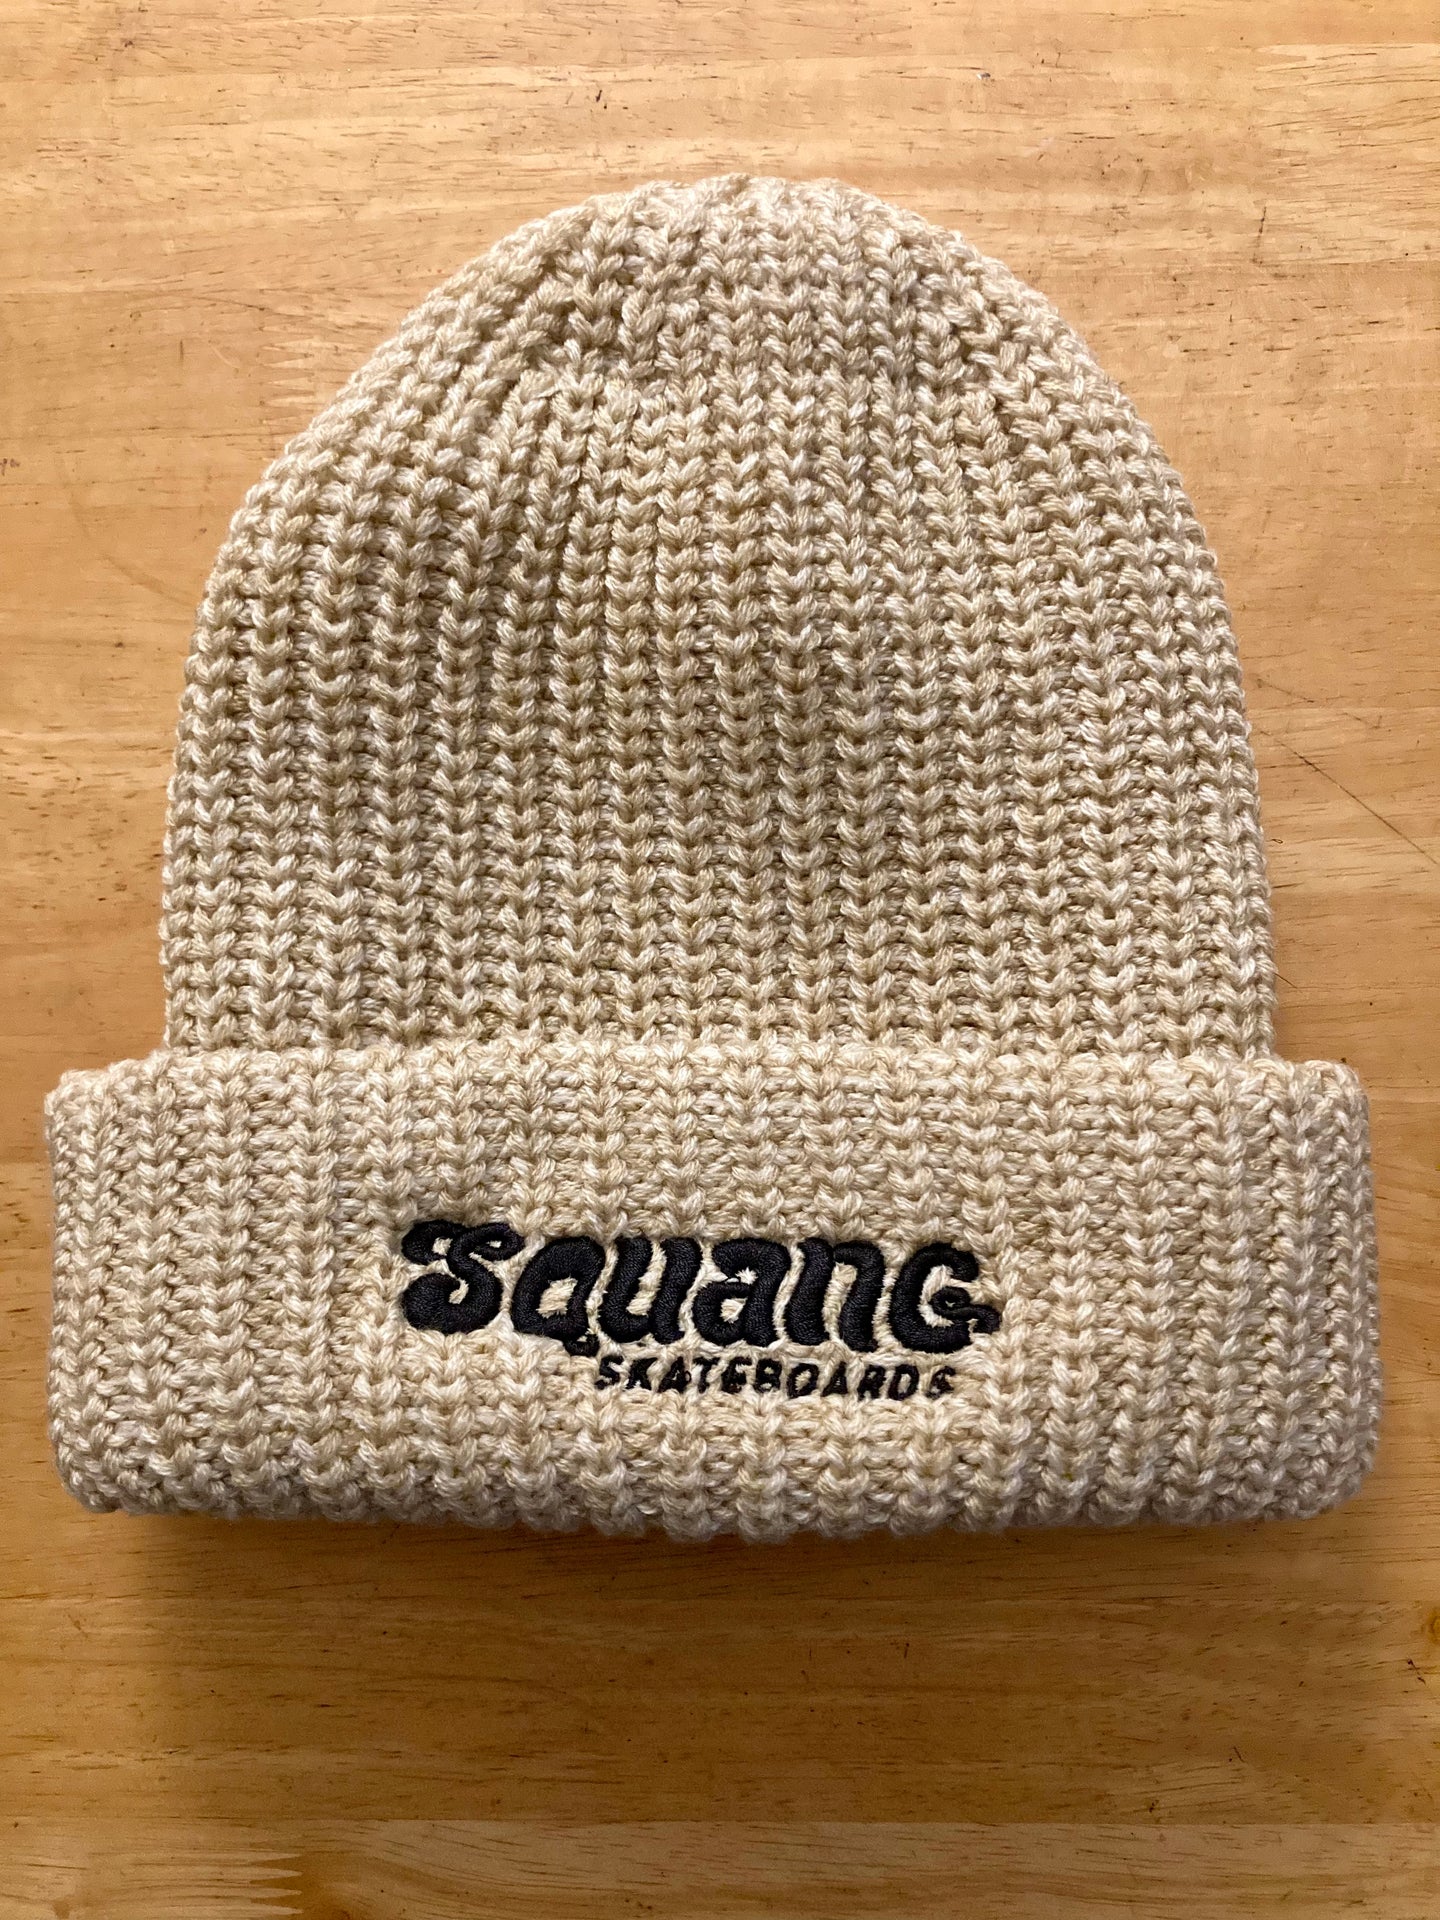 Squang Beanie 2023